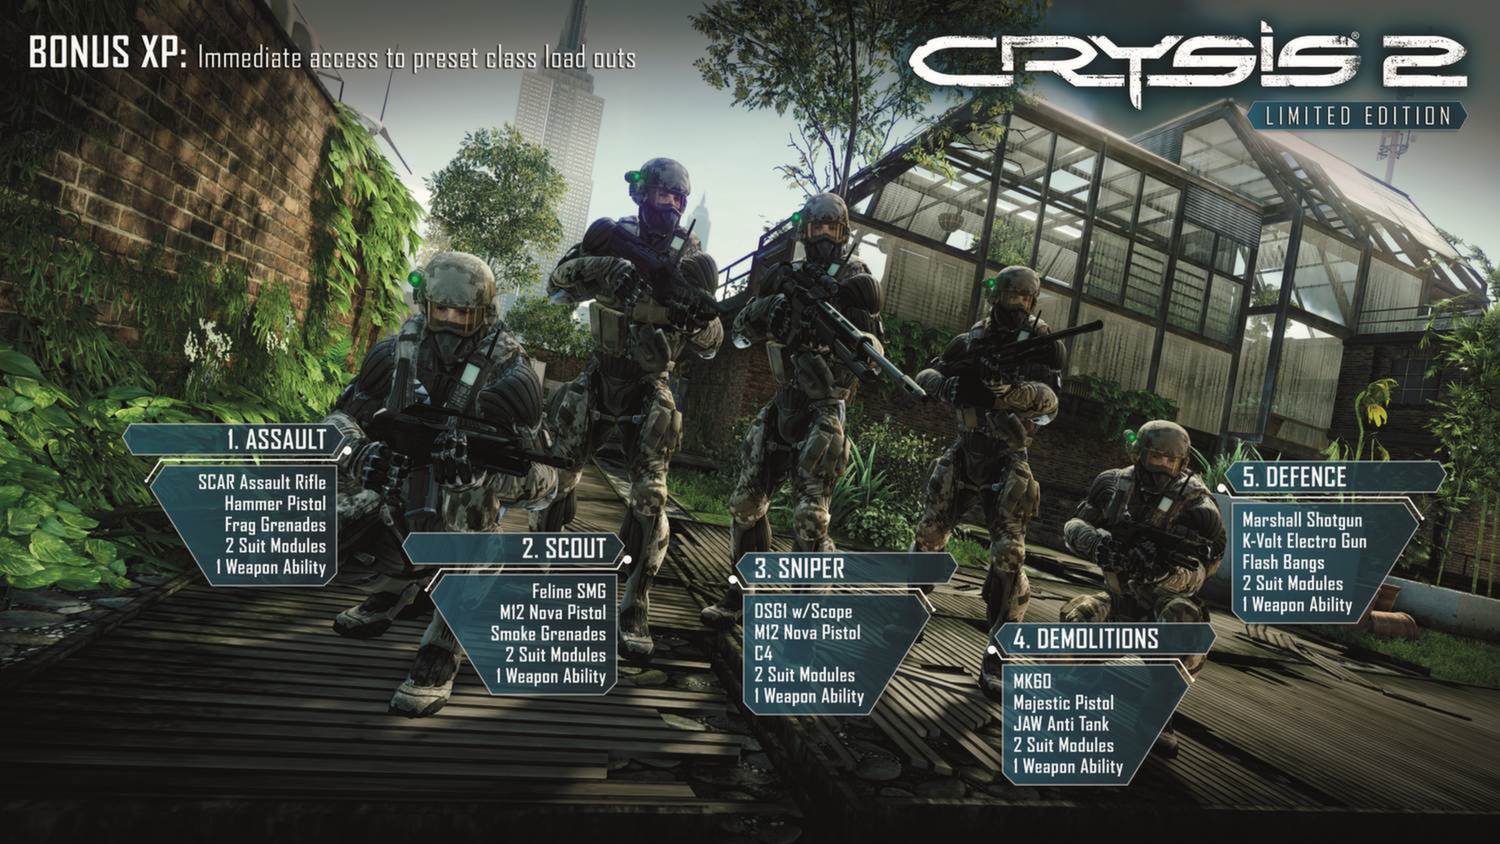 crysis 2 pc consol commands